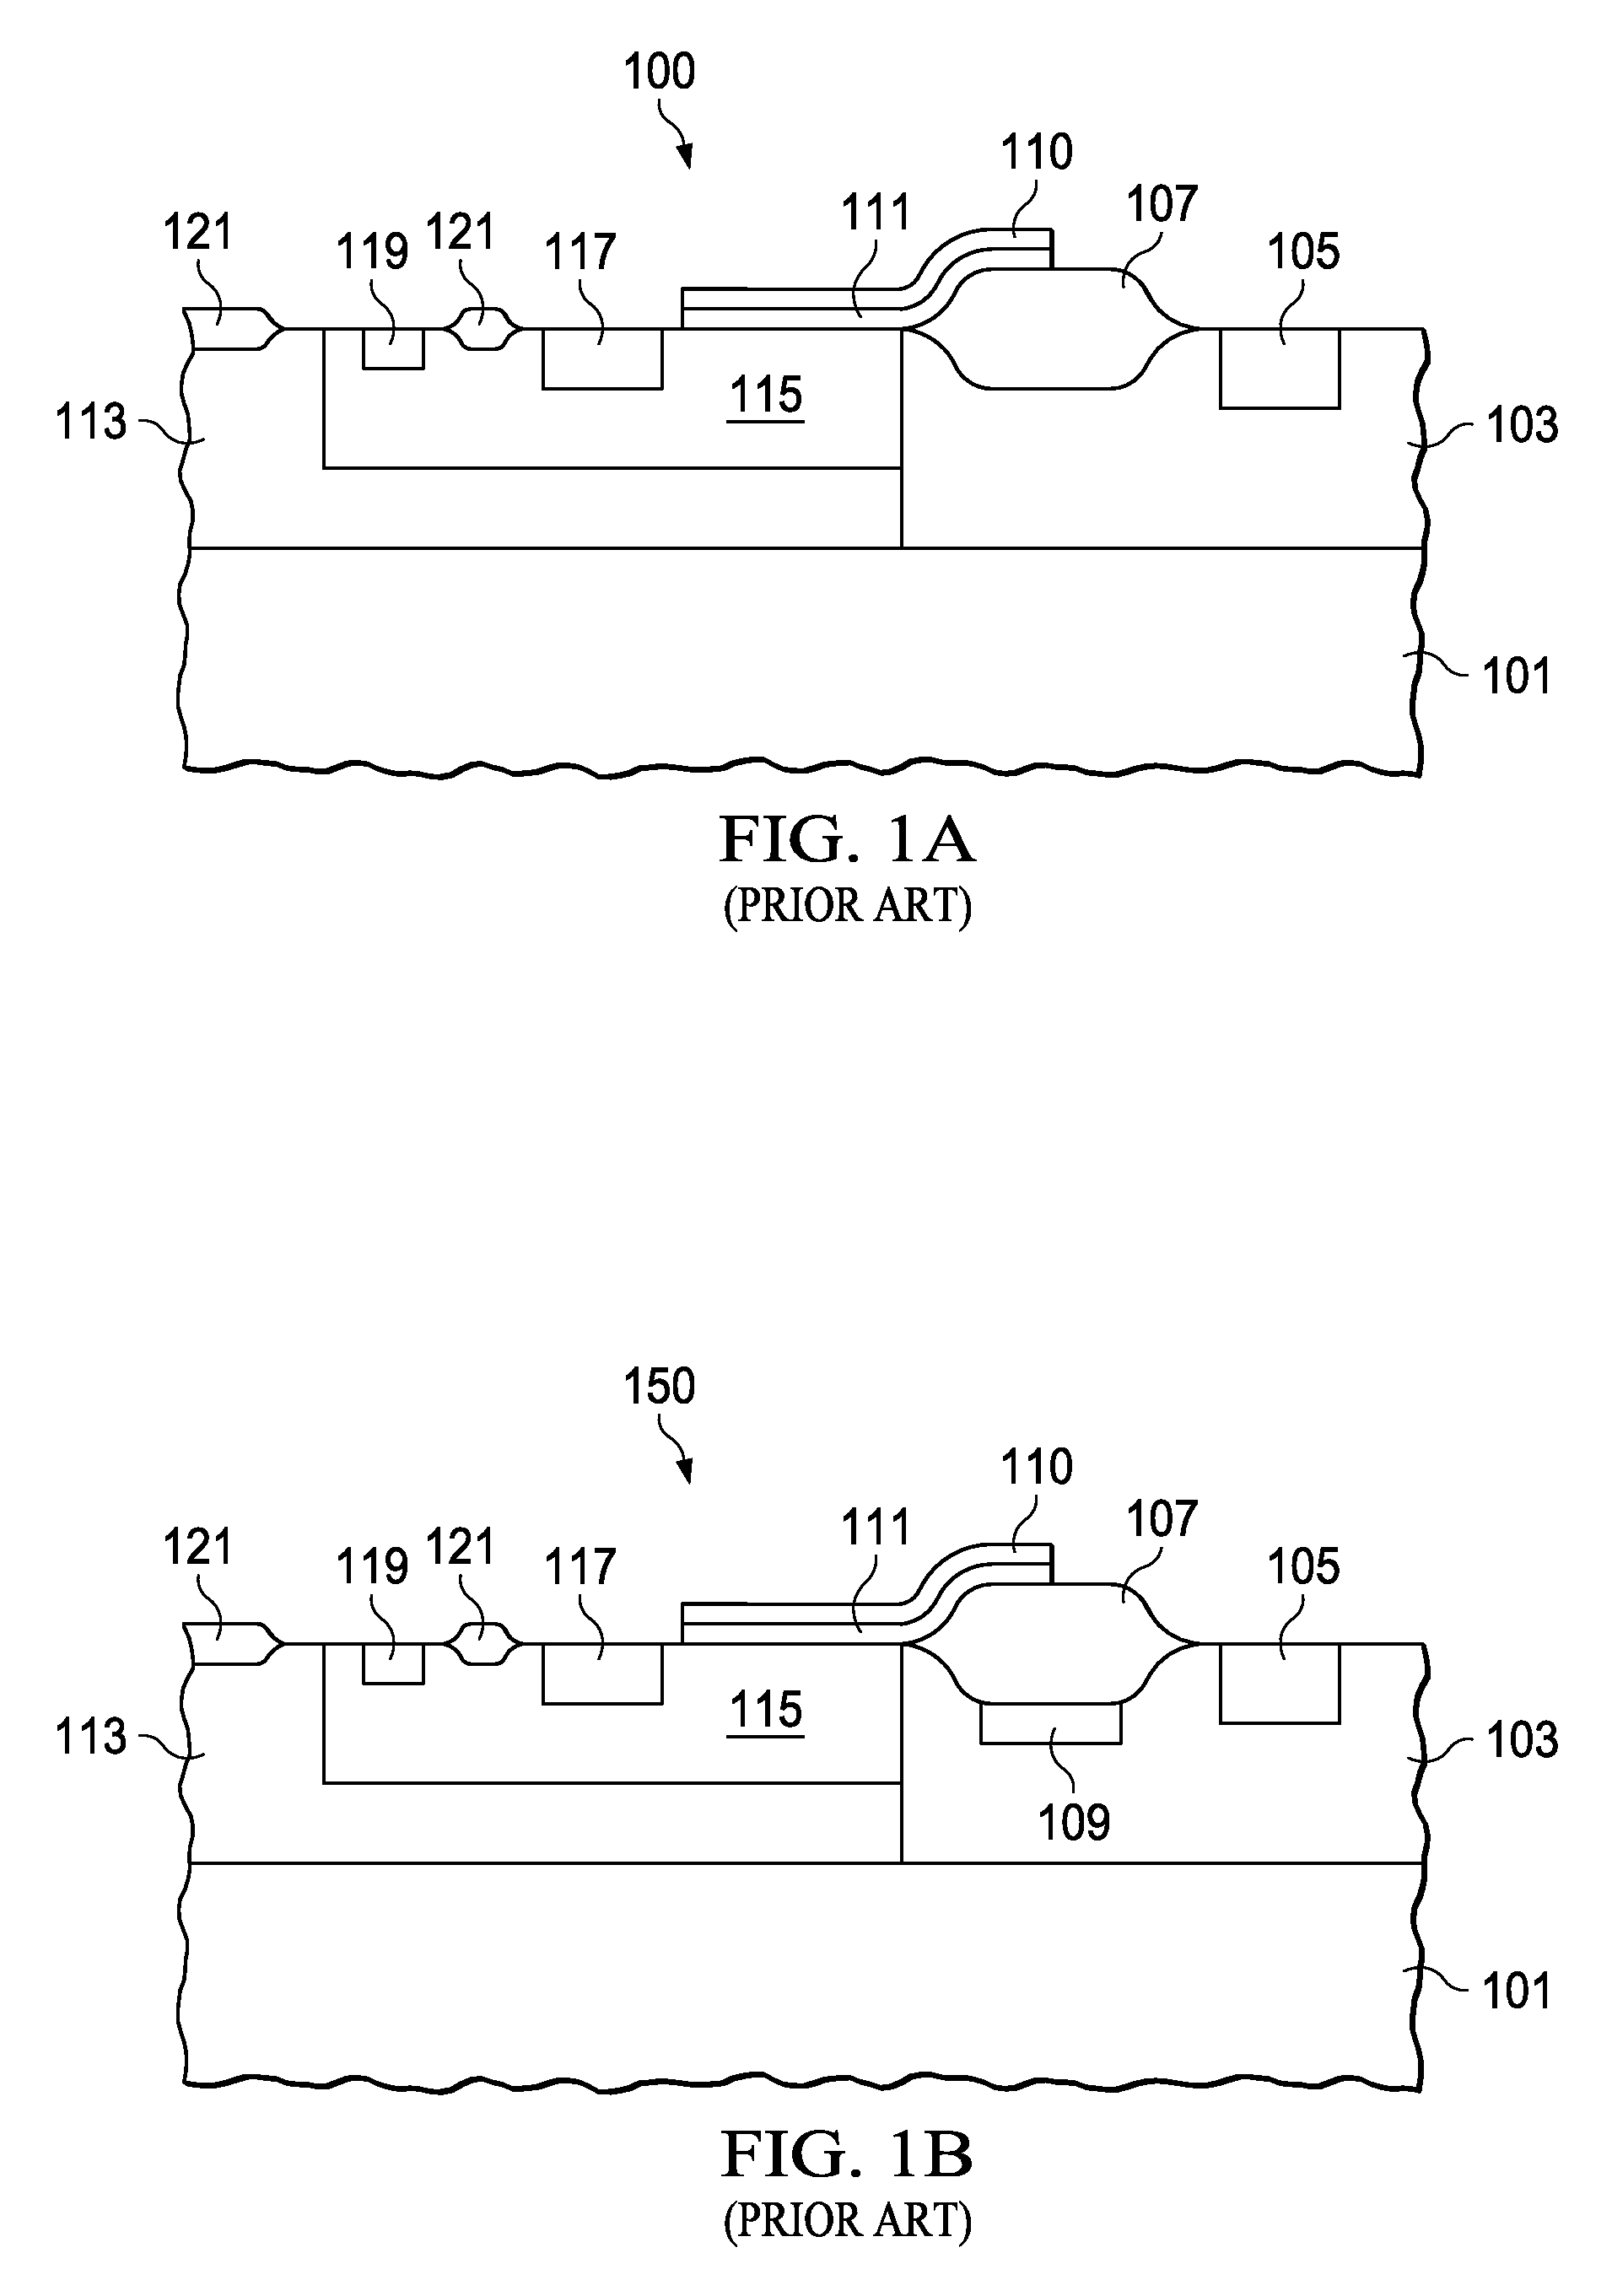 Lateral power MOSFET with high breakdown voltage and low on-resistance